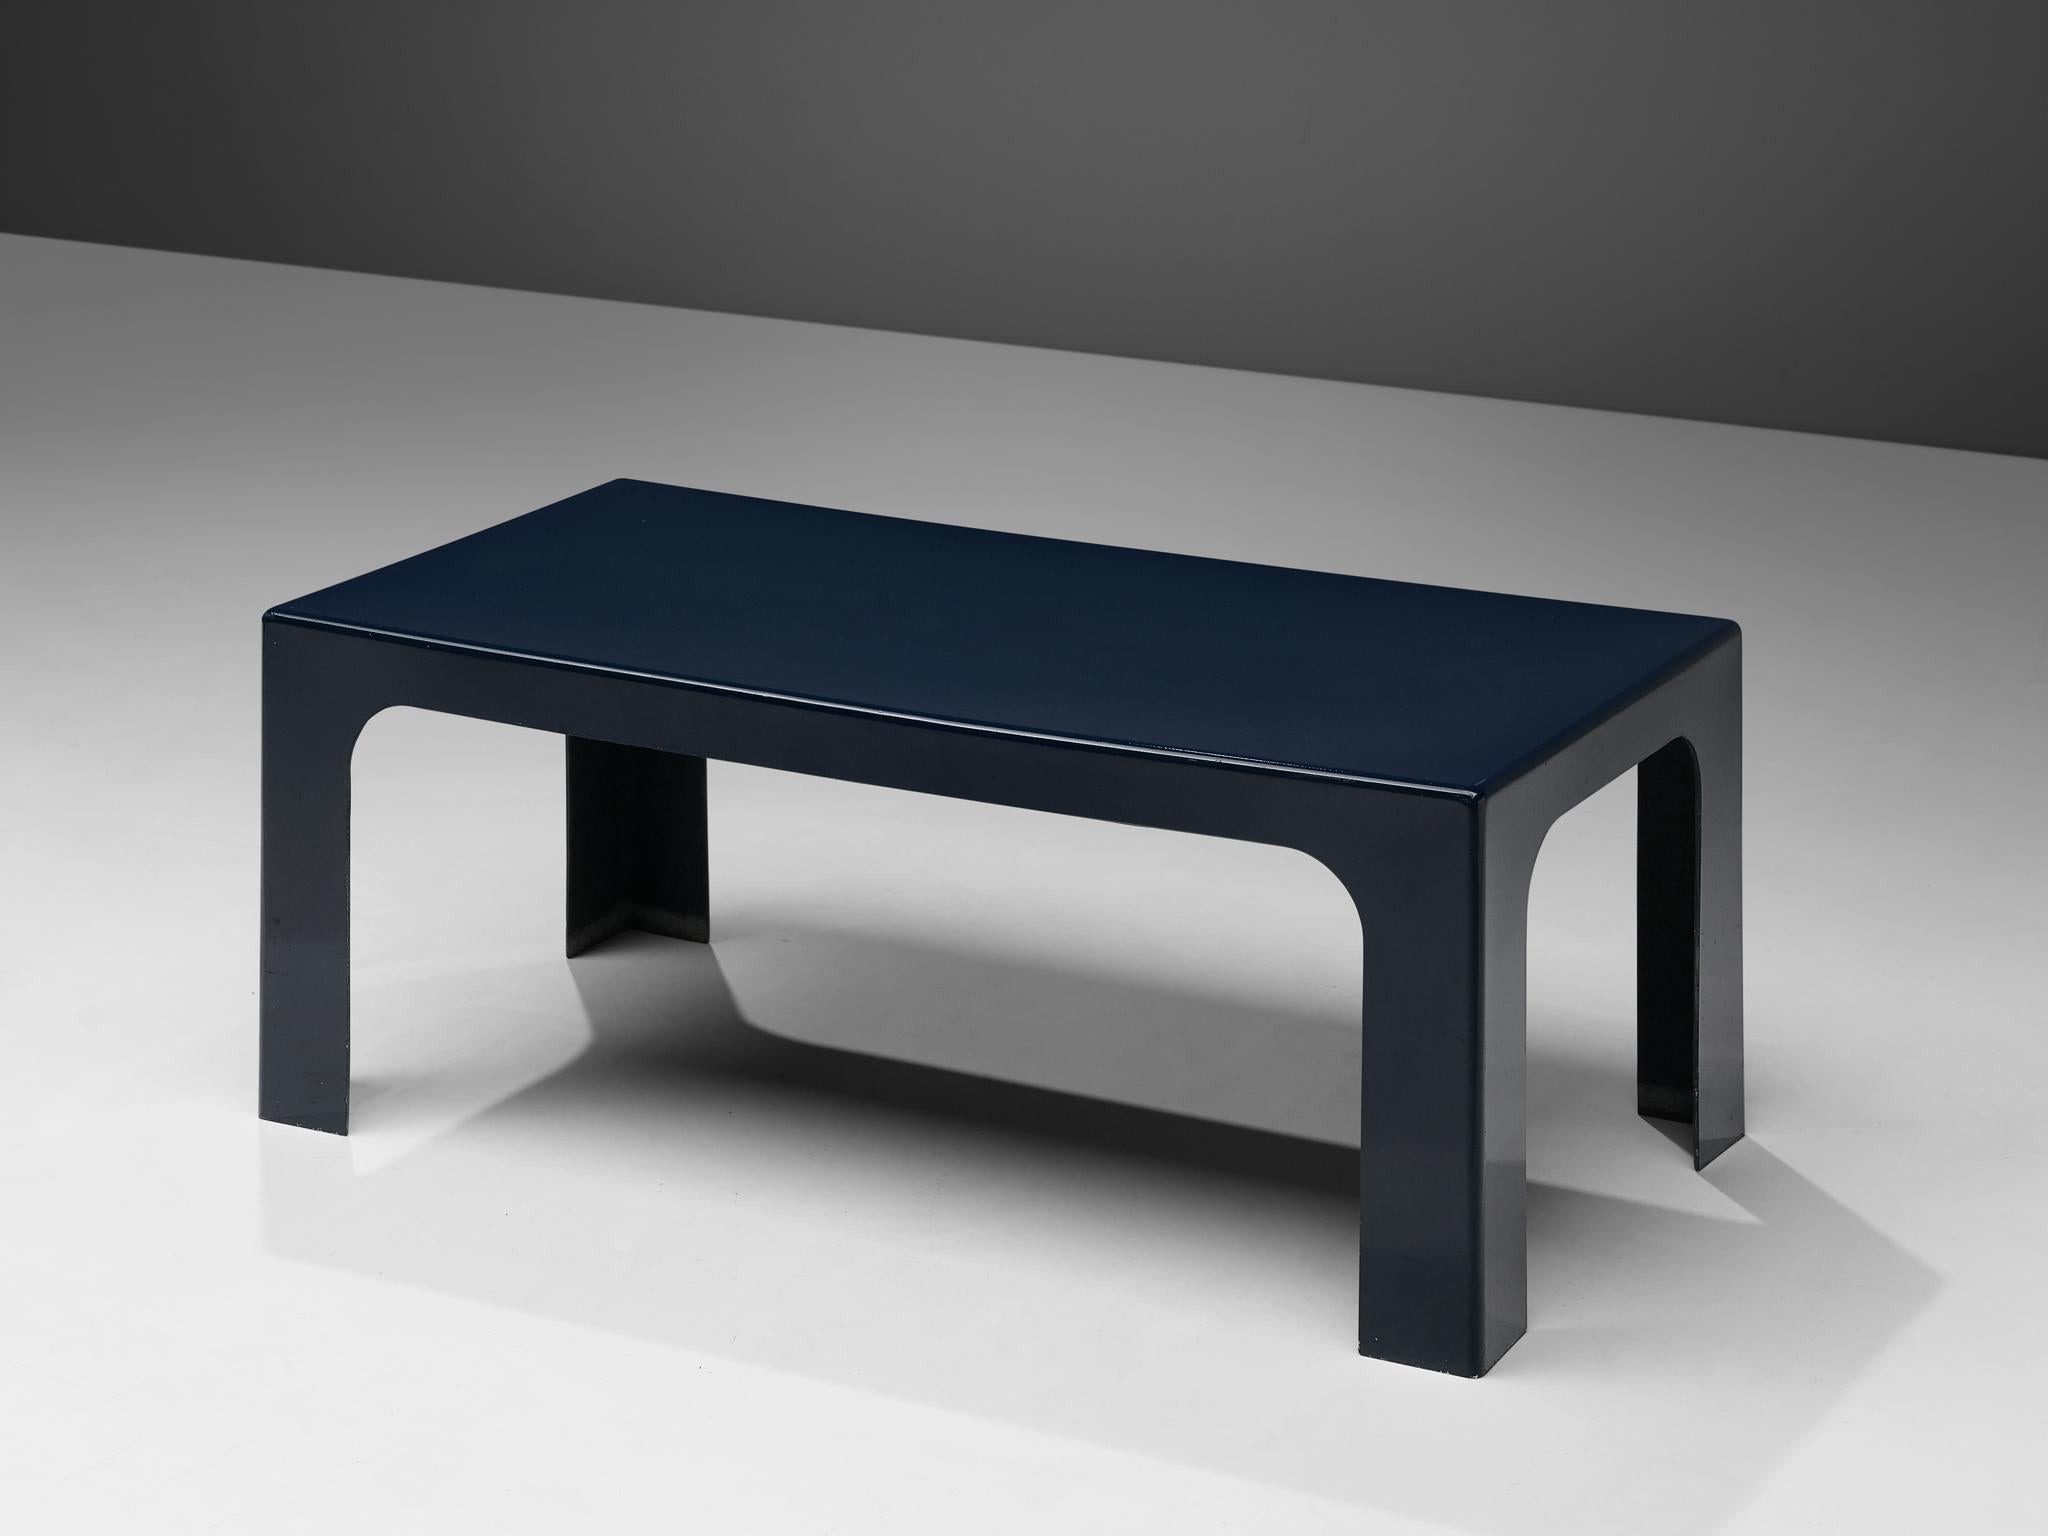 Coffee table, fiberglass, Europe, 1970s.

Modern looking table in blue fiberglass. The freeform table is very durable and due to the material, it is a light weight piece that is yet completely stable. The overall shape is very simplistic but still